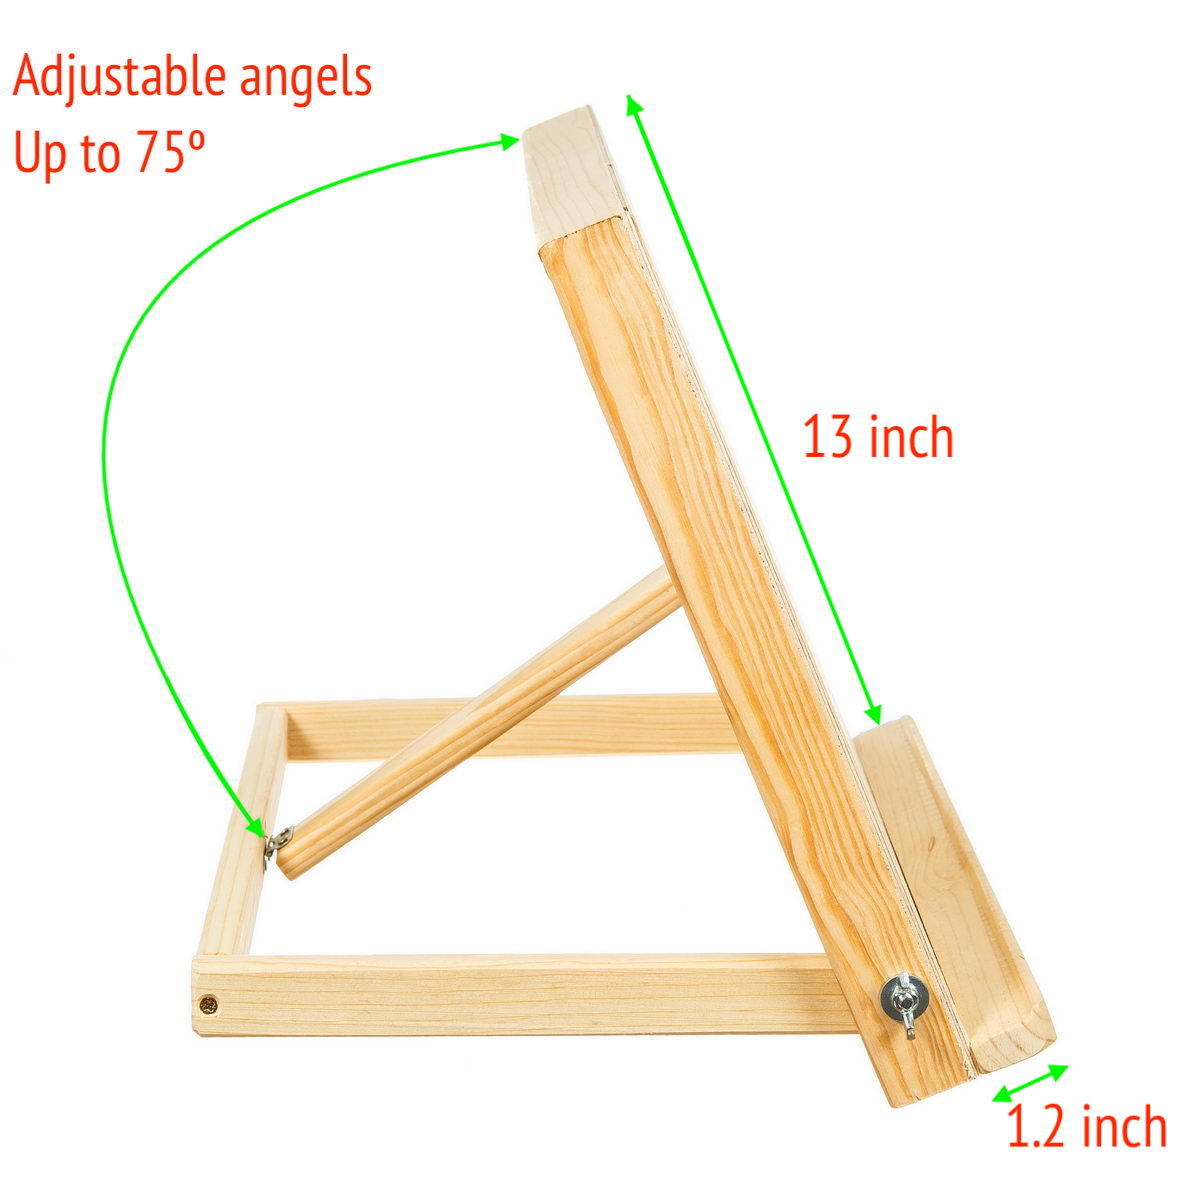 WOODEN EASEL STAND > Solid Wooden Tabletop Artist Studio Easel 17.5x12.5 -  Sturdy Pine Wood Desktop Painting, Drawing Table, Sketching Board & Display  Easel… Buy from e-shop